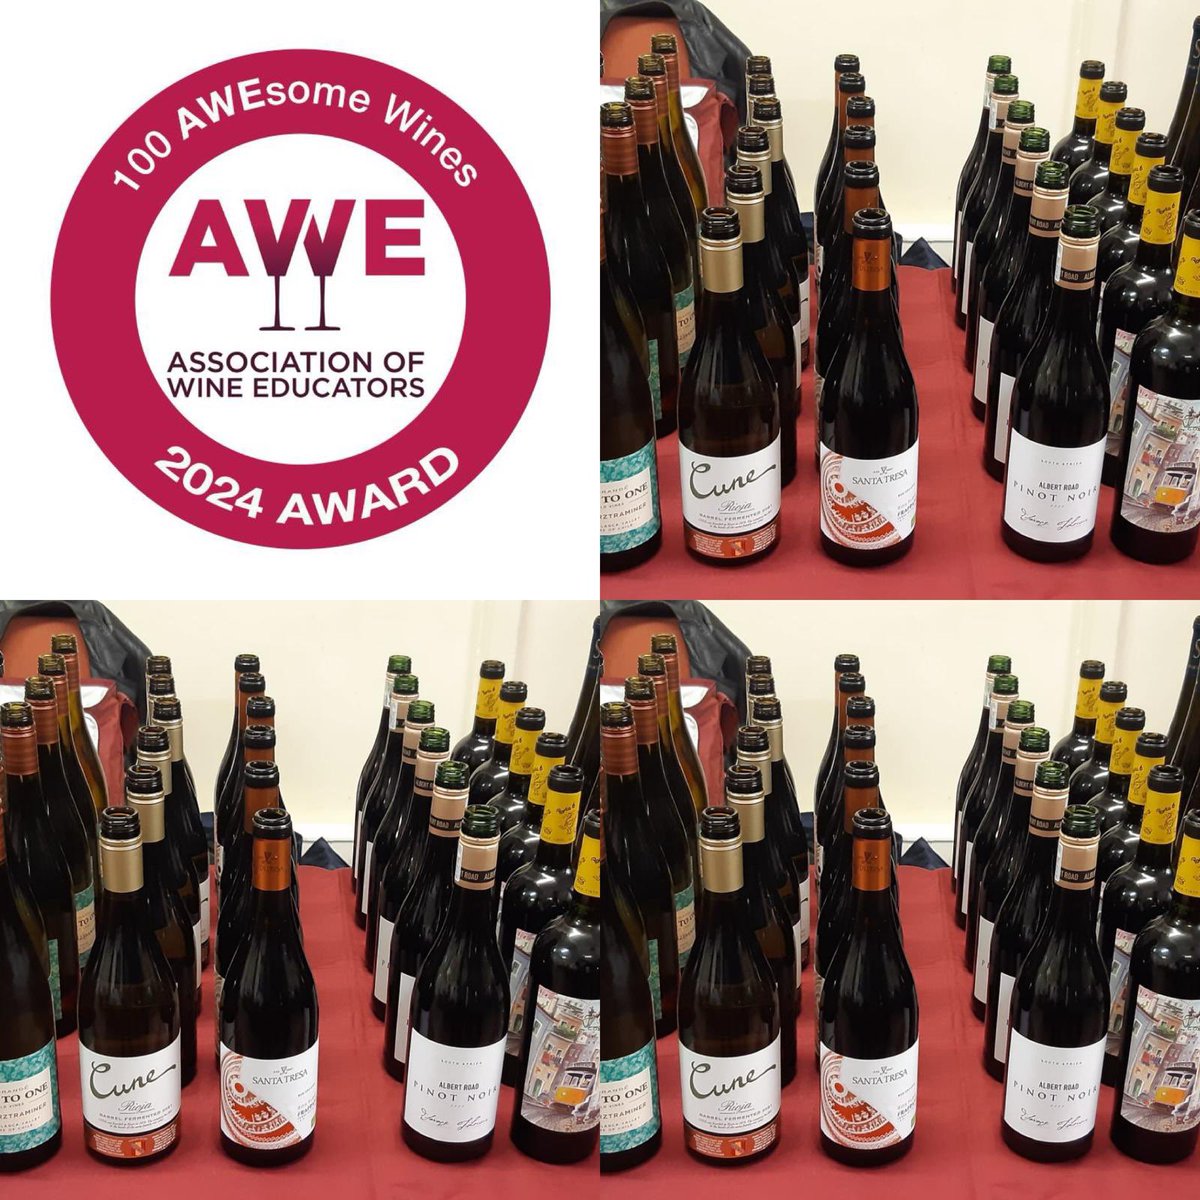 A huge pleasure to share a photo of the wines presented by @CircleofWine Hon. Secretary @VivienneFranks during a 100 AWEsome Wines Tasting. These amazing wines were sourced from @waitrose and @majesticwine . Check out the full list at 100wines.wineeducators.com @AssocWineEd